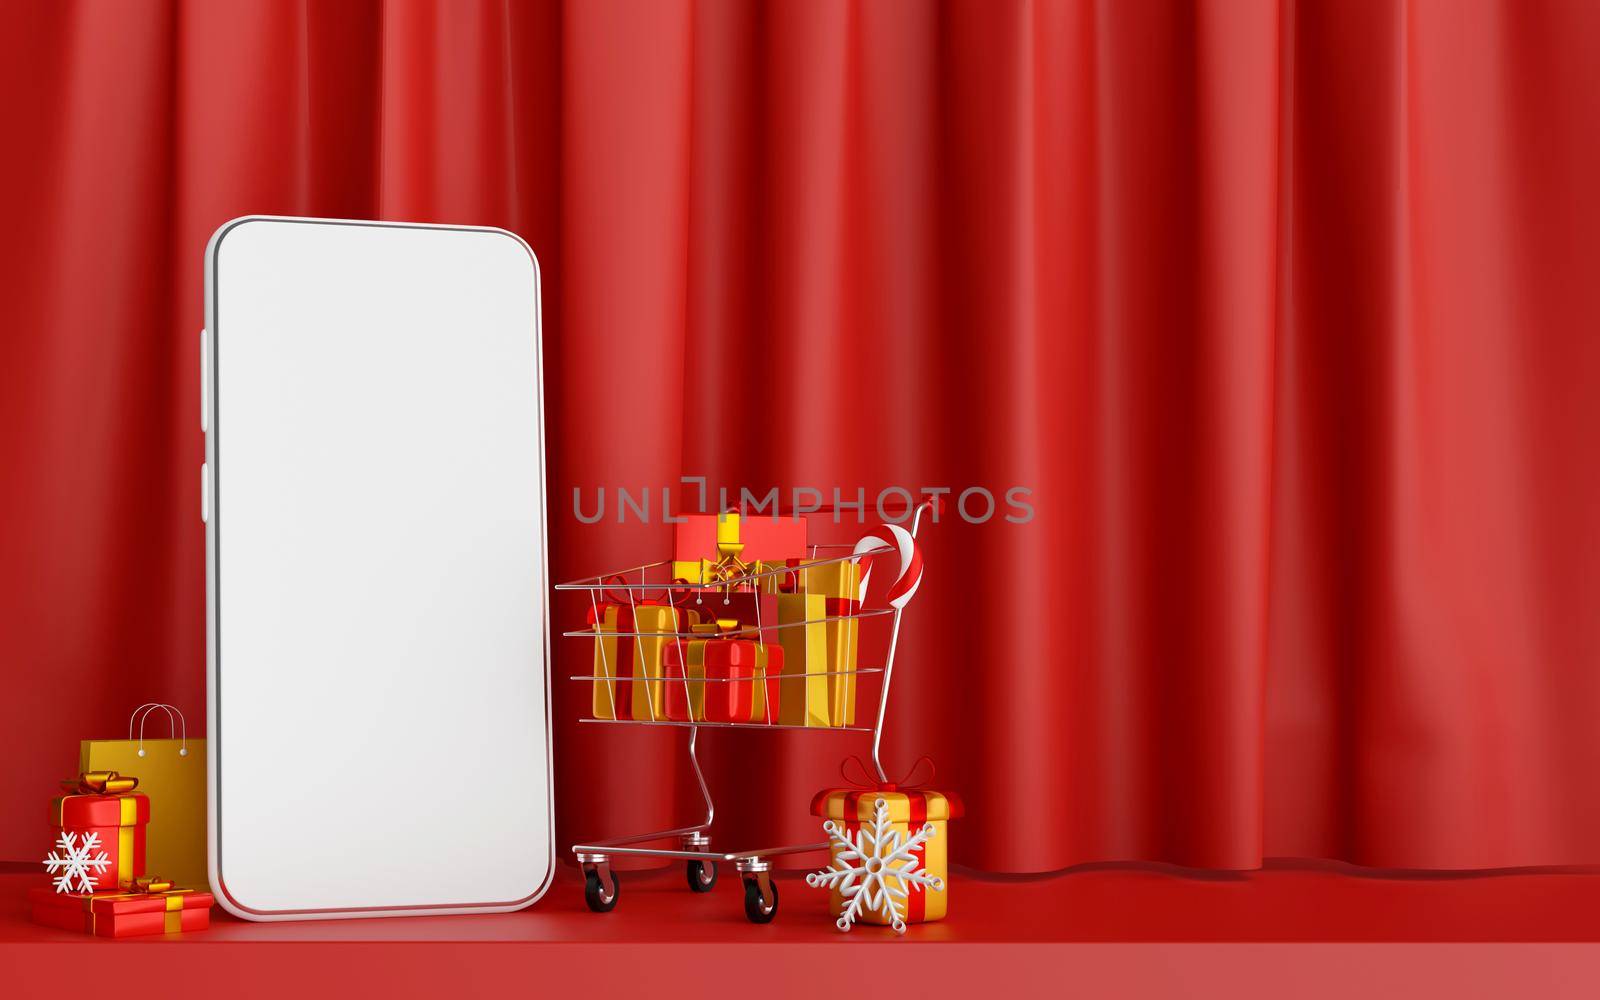 Christmas poster of Christmas shopping online on smartphone concept, 3d illustration